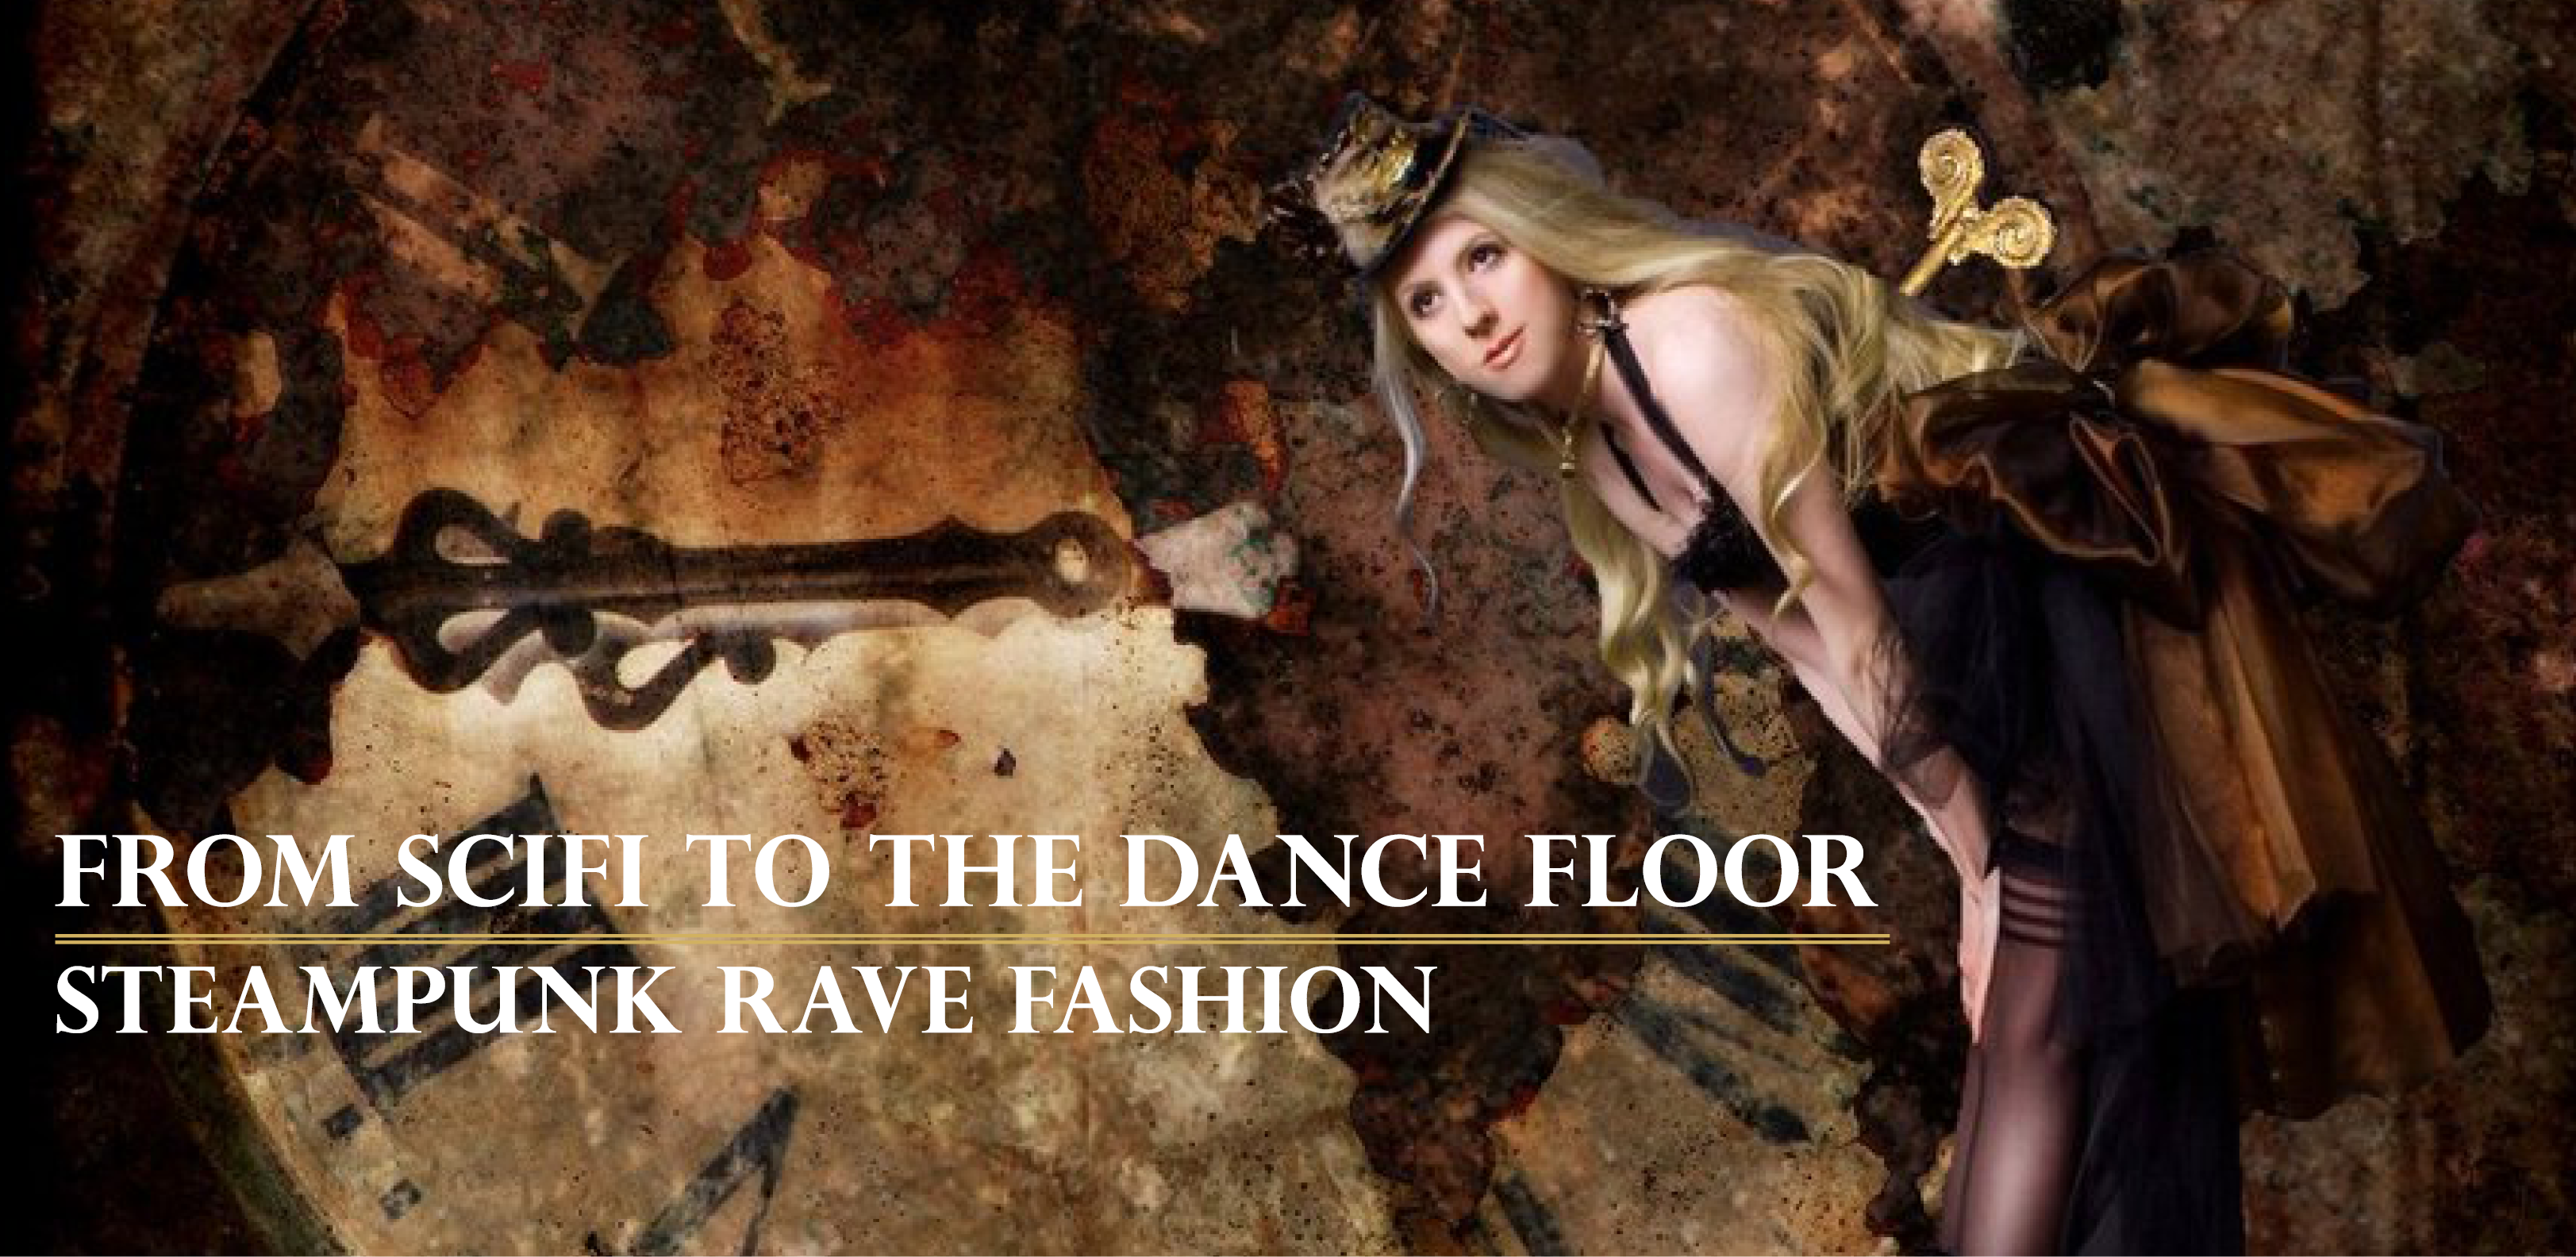 onblast-edm-blog/from-scifi-to-the-dance-floor-steampunk-rave-fashion